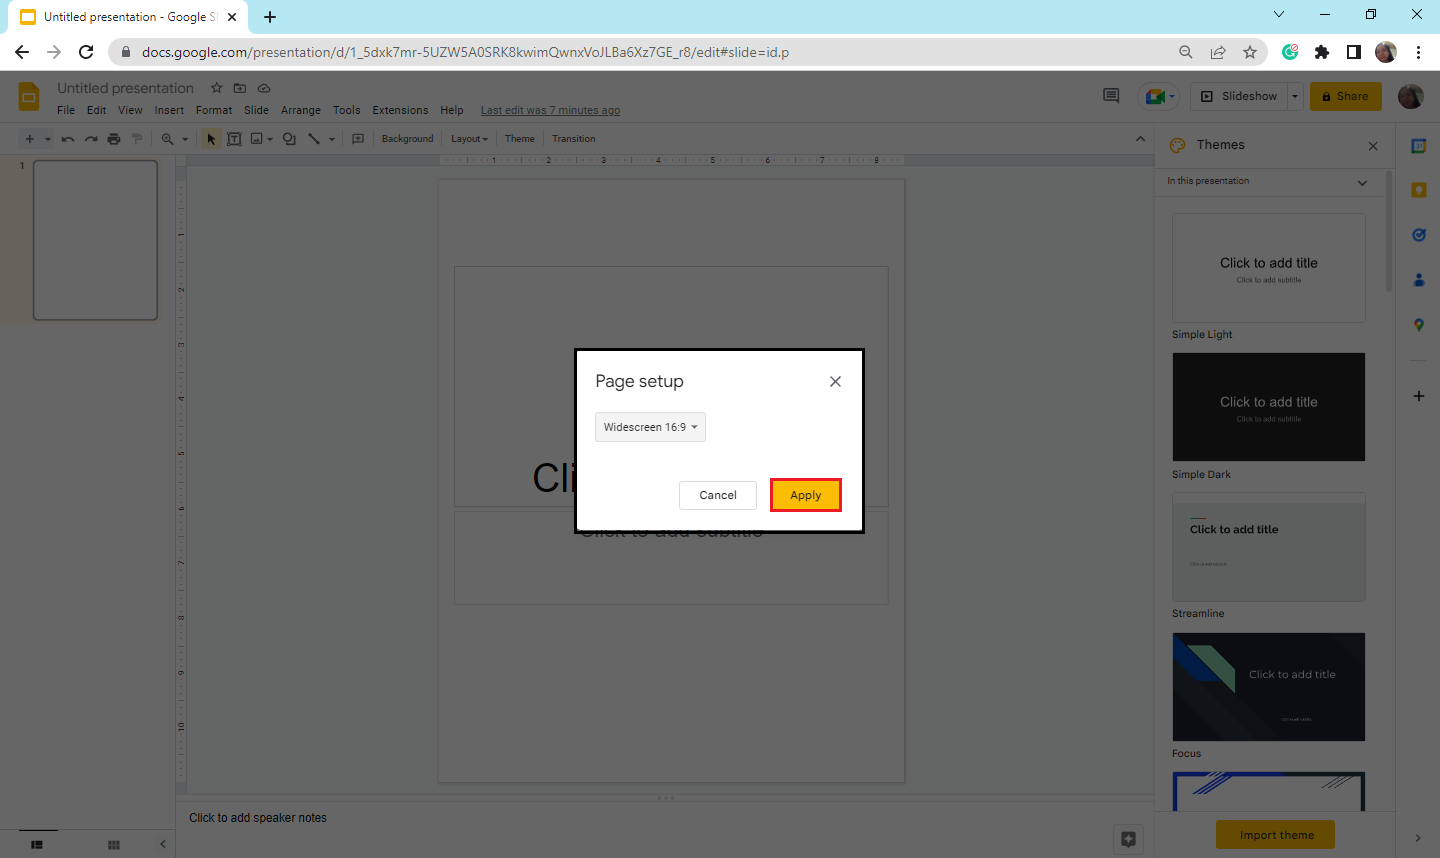 Then click apply to turn your Google Slide back to landscape.